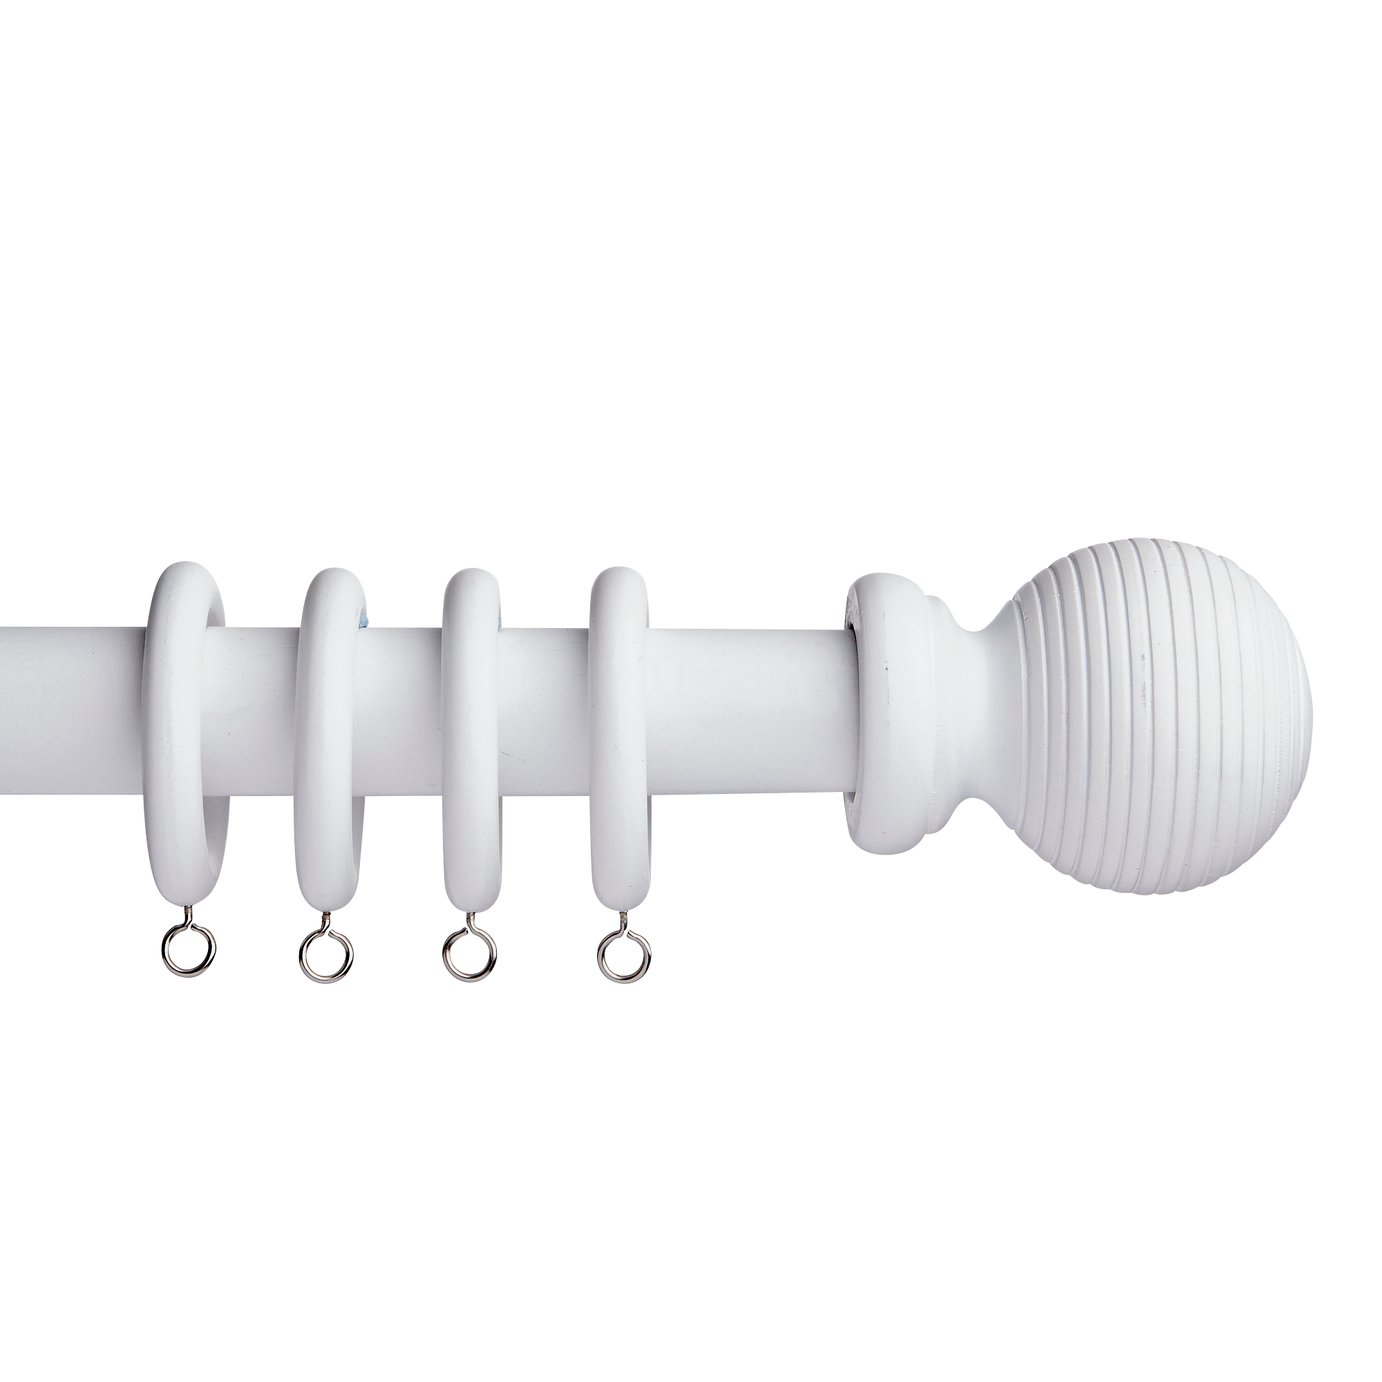 Argos Home 2.4m Grooved Ball Wooden Curtain Pole - White